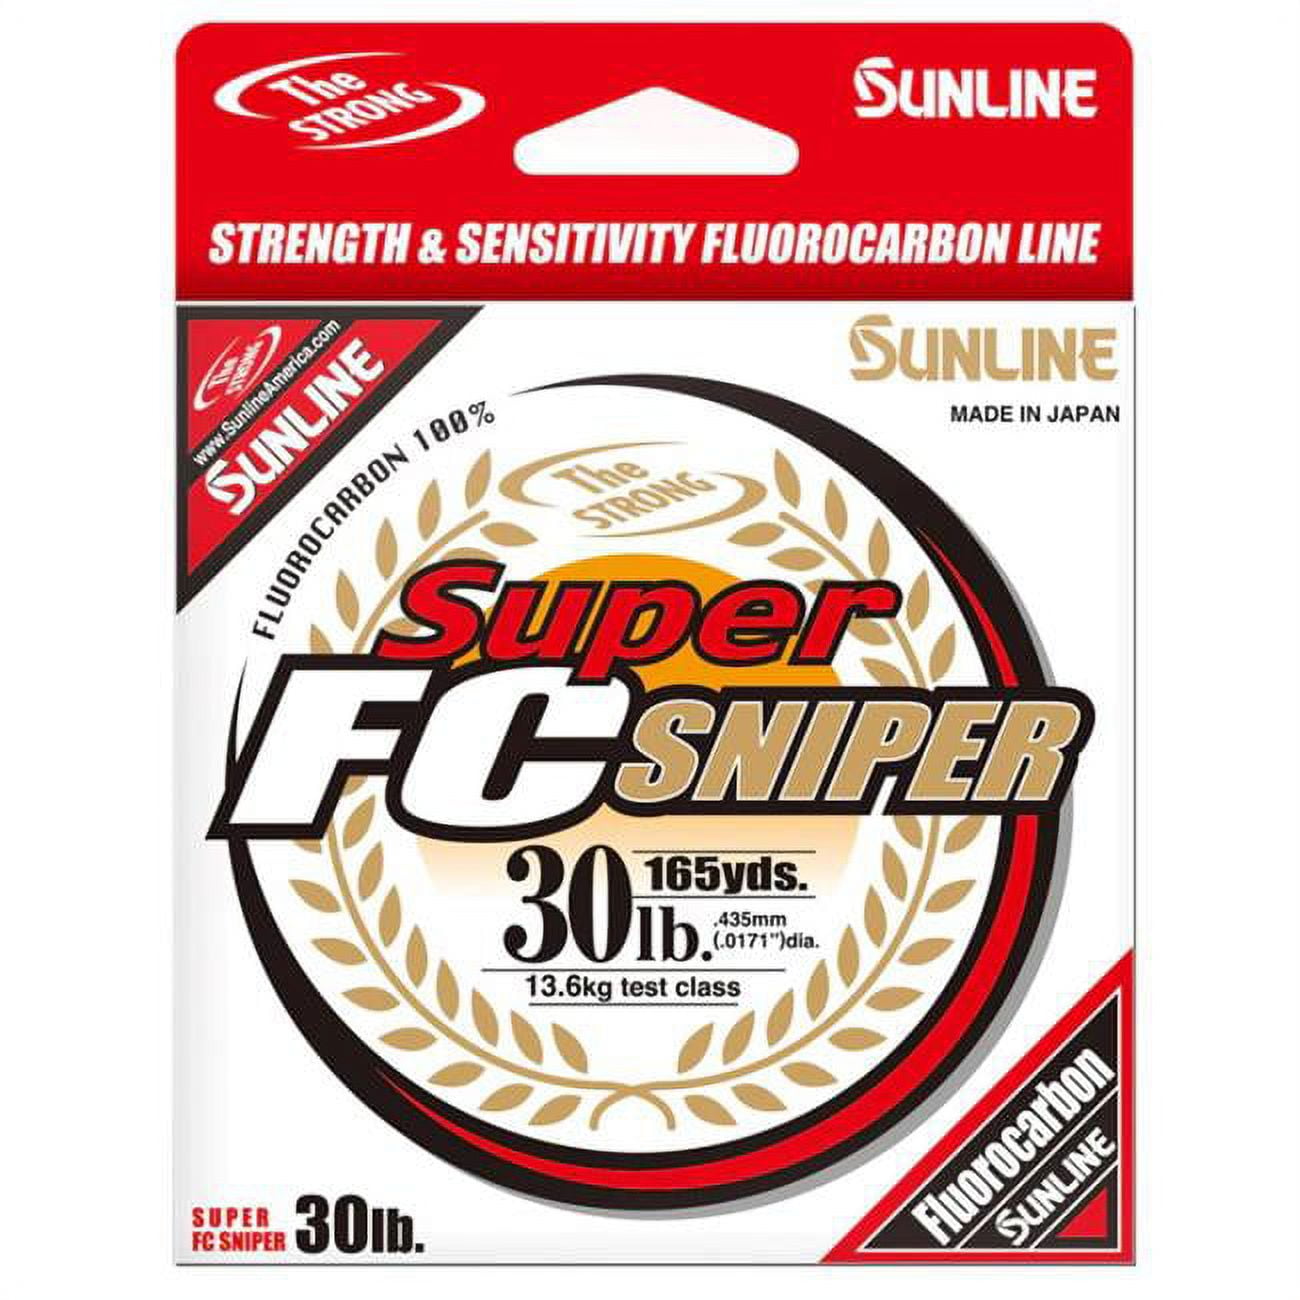 Sunline 63038950 16 lbs Super FC Sniper Fluorocarbon Fishing Line, Natural  Clear - 1200 yards